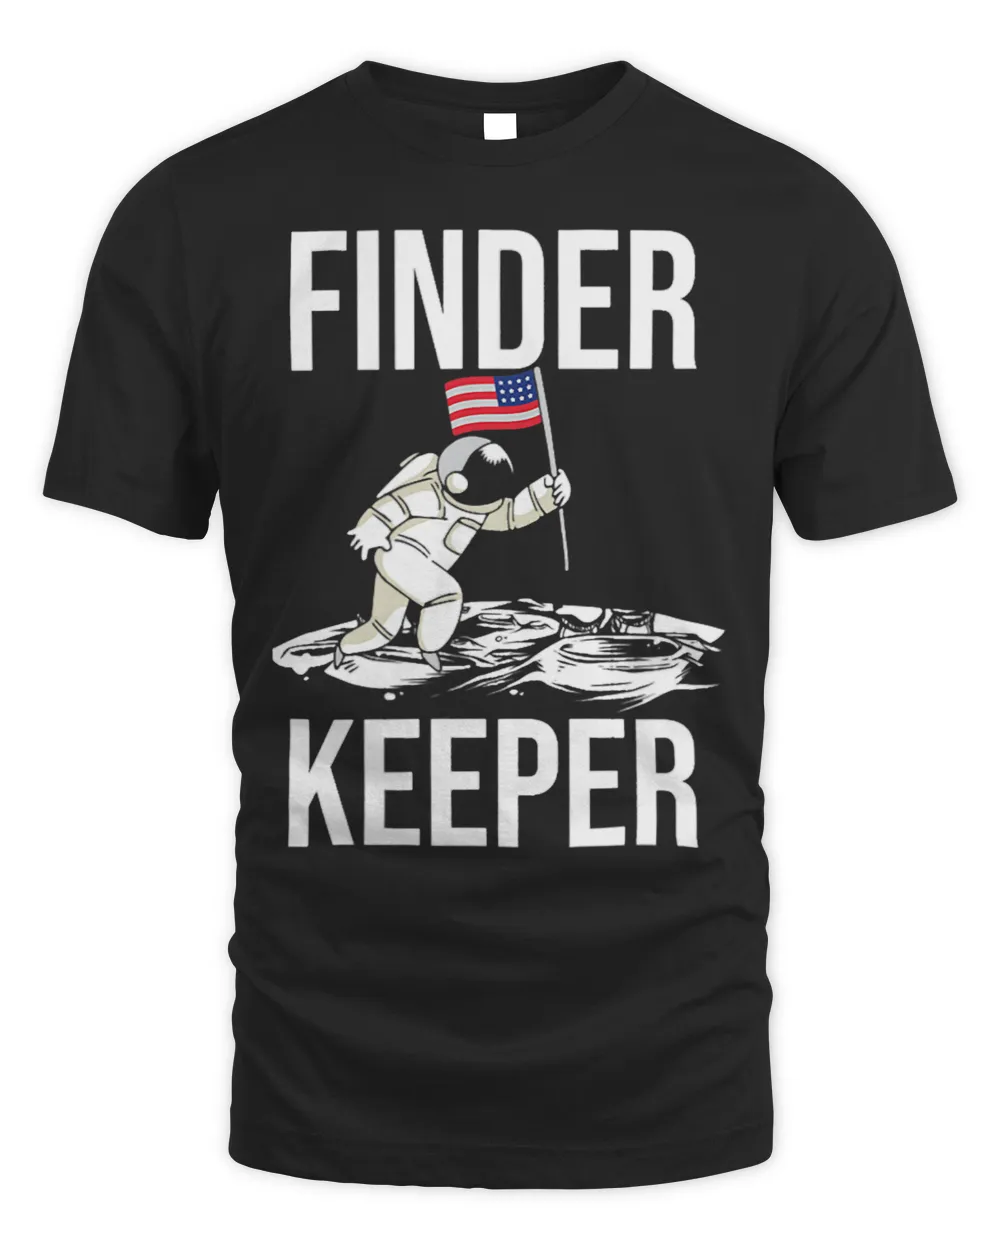 Finders and Keepers clothing Astronaut Moon landing 1